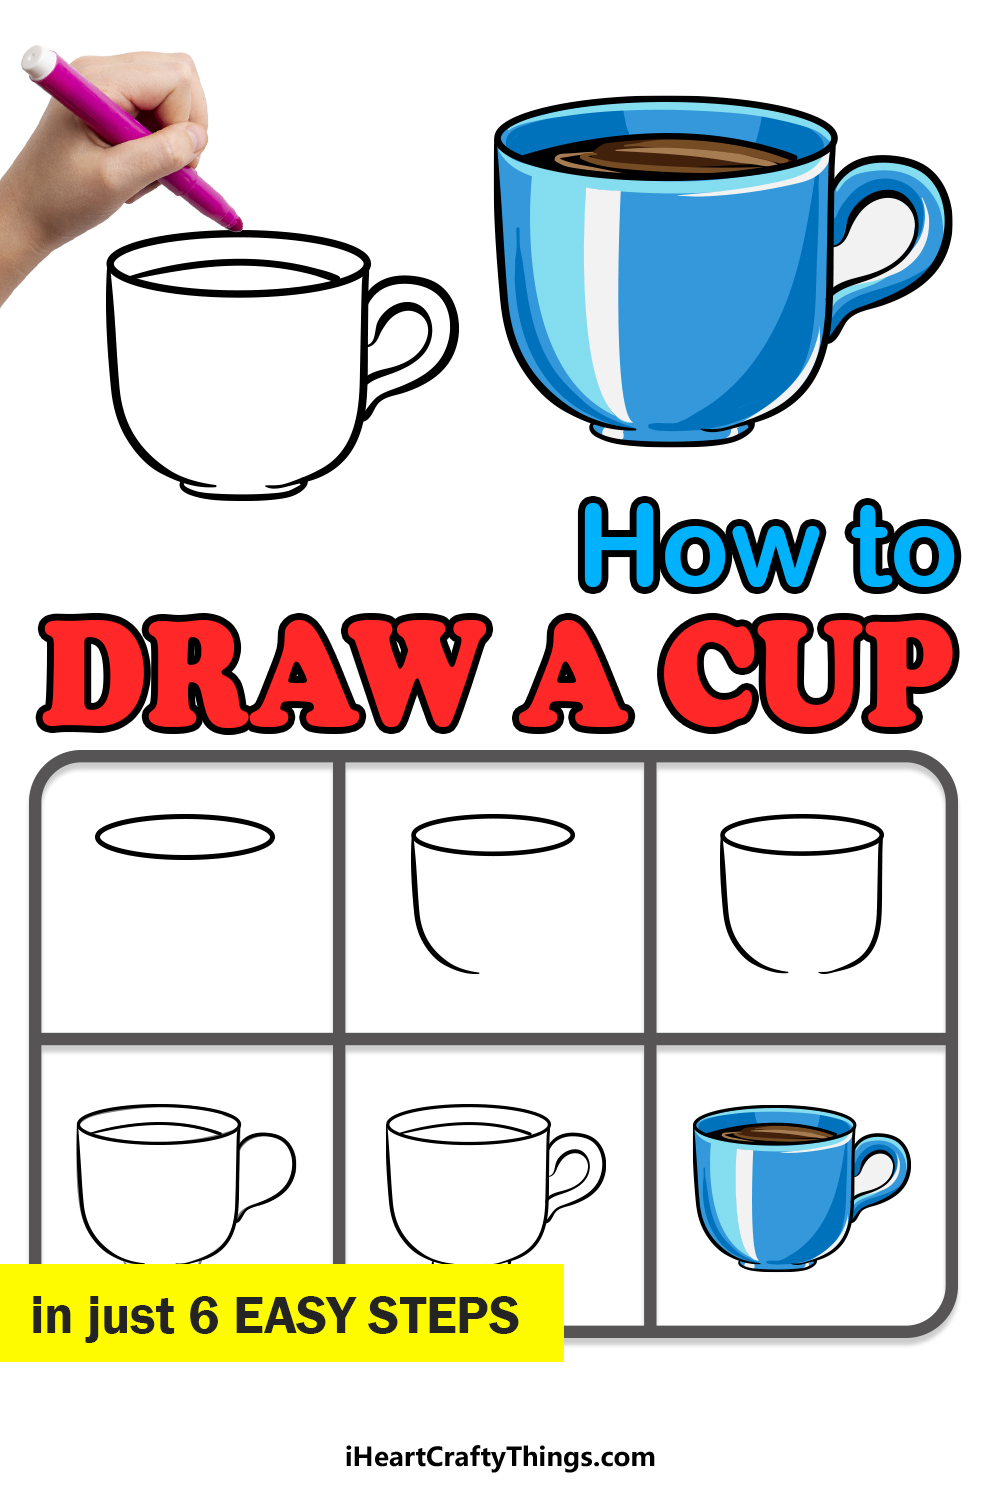 how to draw a cup in 6 easy steps